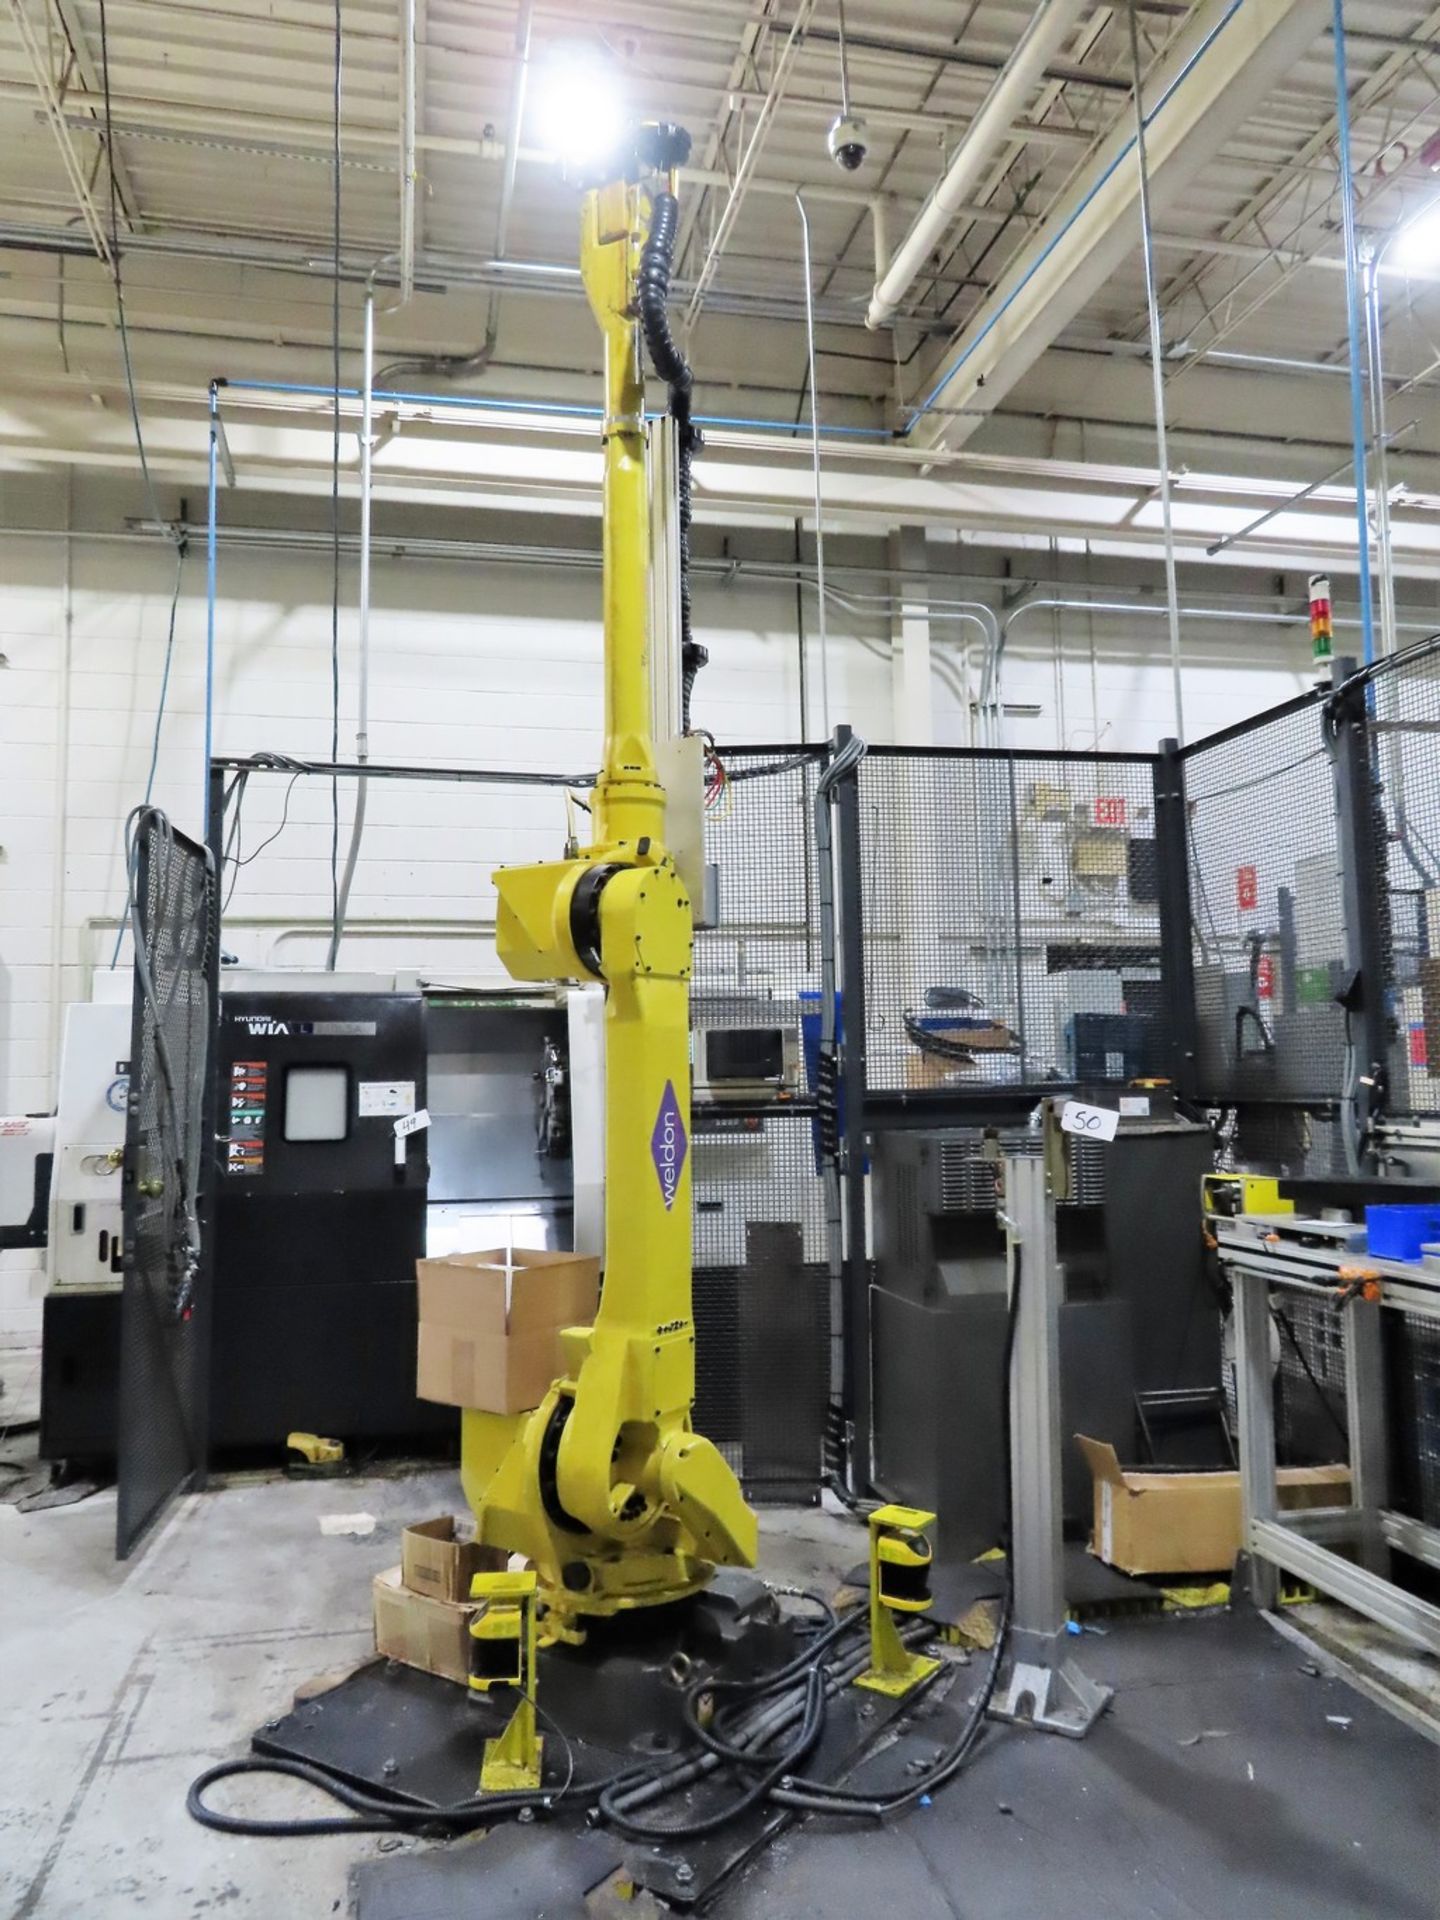 Fanuc M-710ic/20l 6-Axis CNC Robot With R30-i8 CNC Control - Image 2 of 14